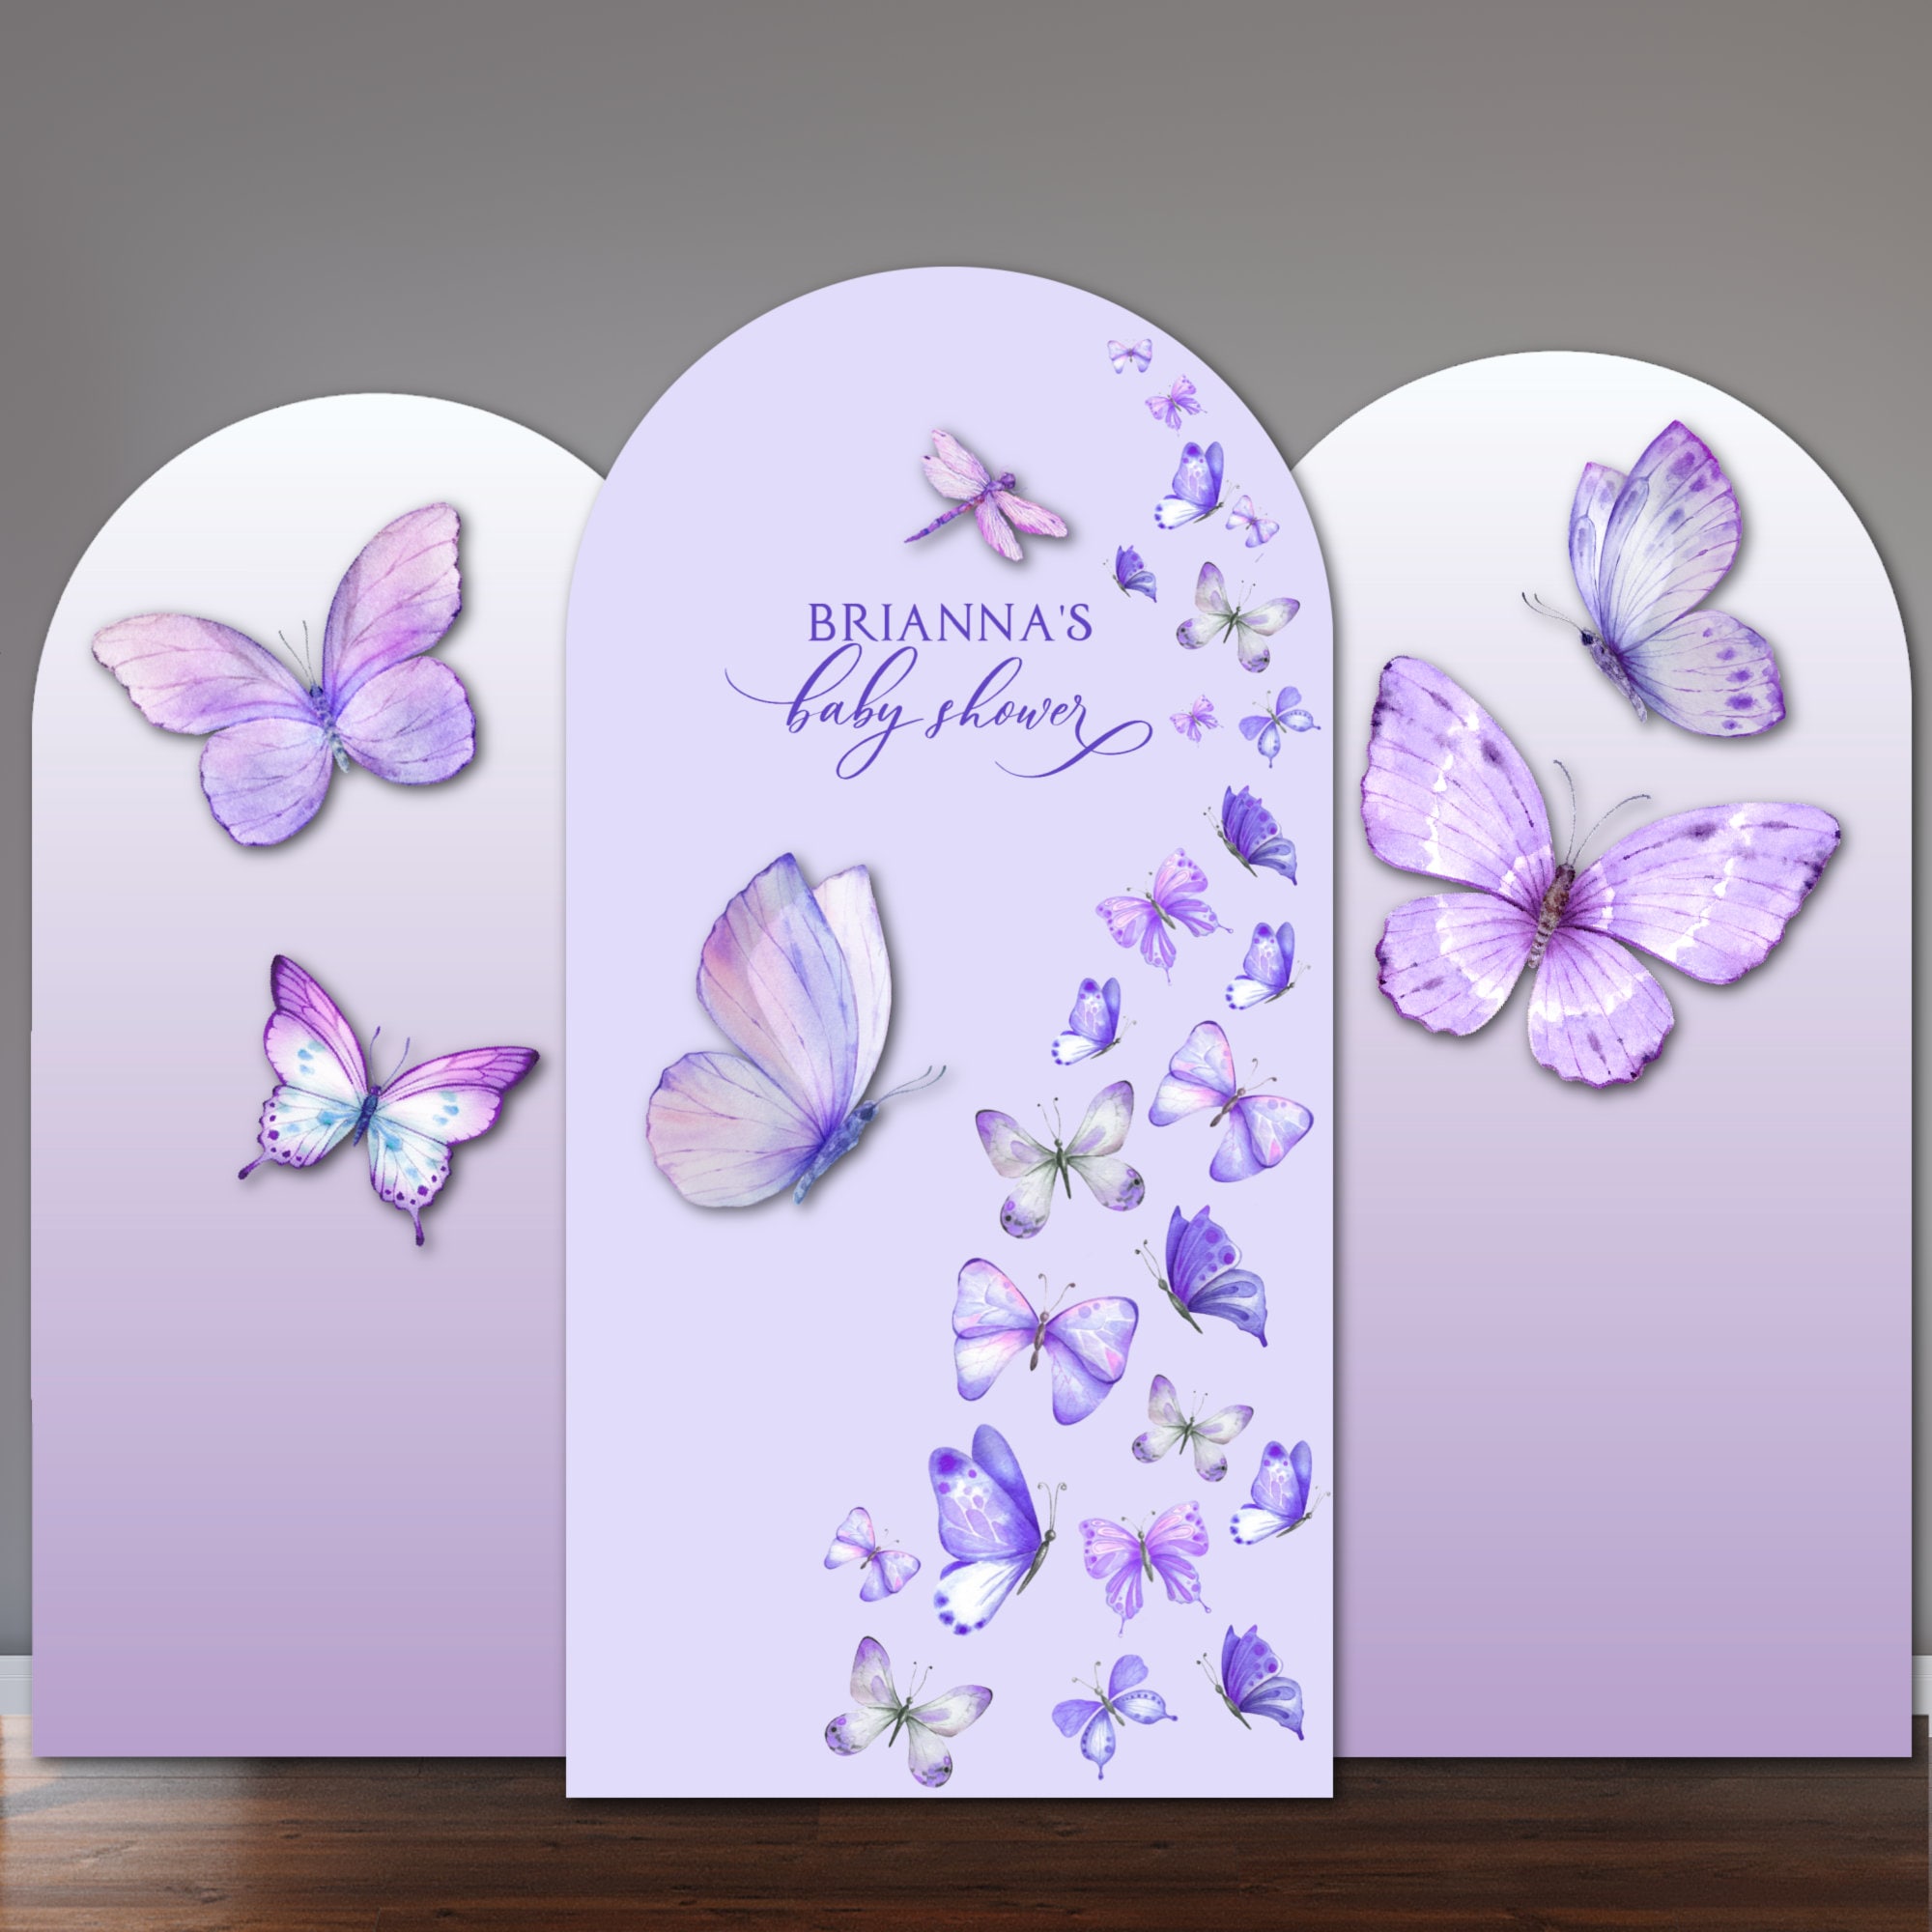  Abaodam 4 Pcs Party Decoration Butterfly Wedding Decor  Decorative Butterflies Mariposas Decorativas para Fiesta Wall Butterflies  Wall Ornament Three-Dimensional 3D Paper Butterfly : Home & Kitchen